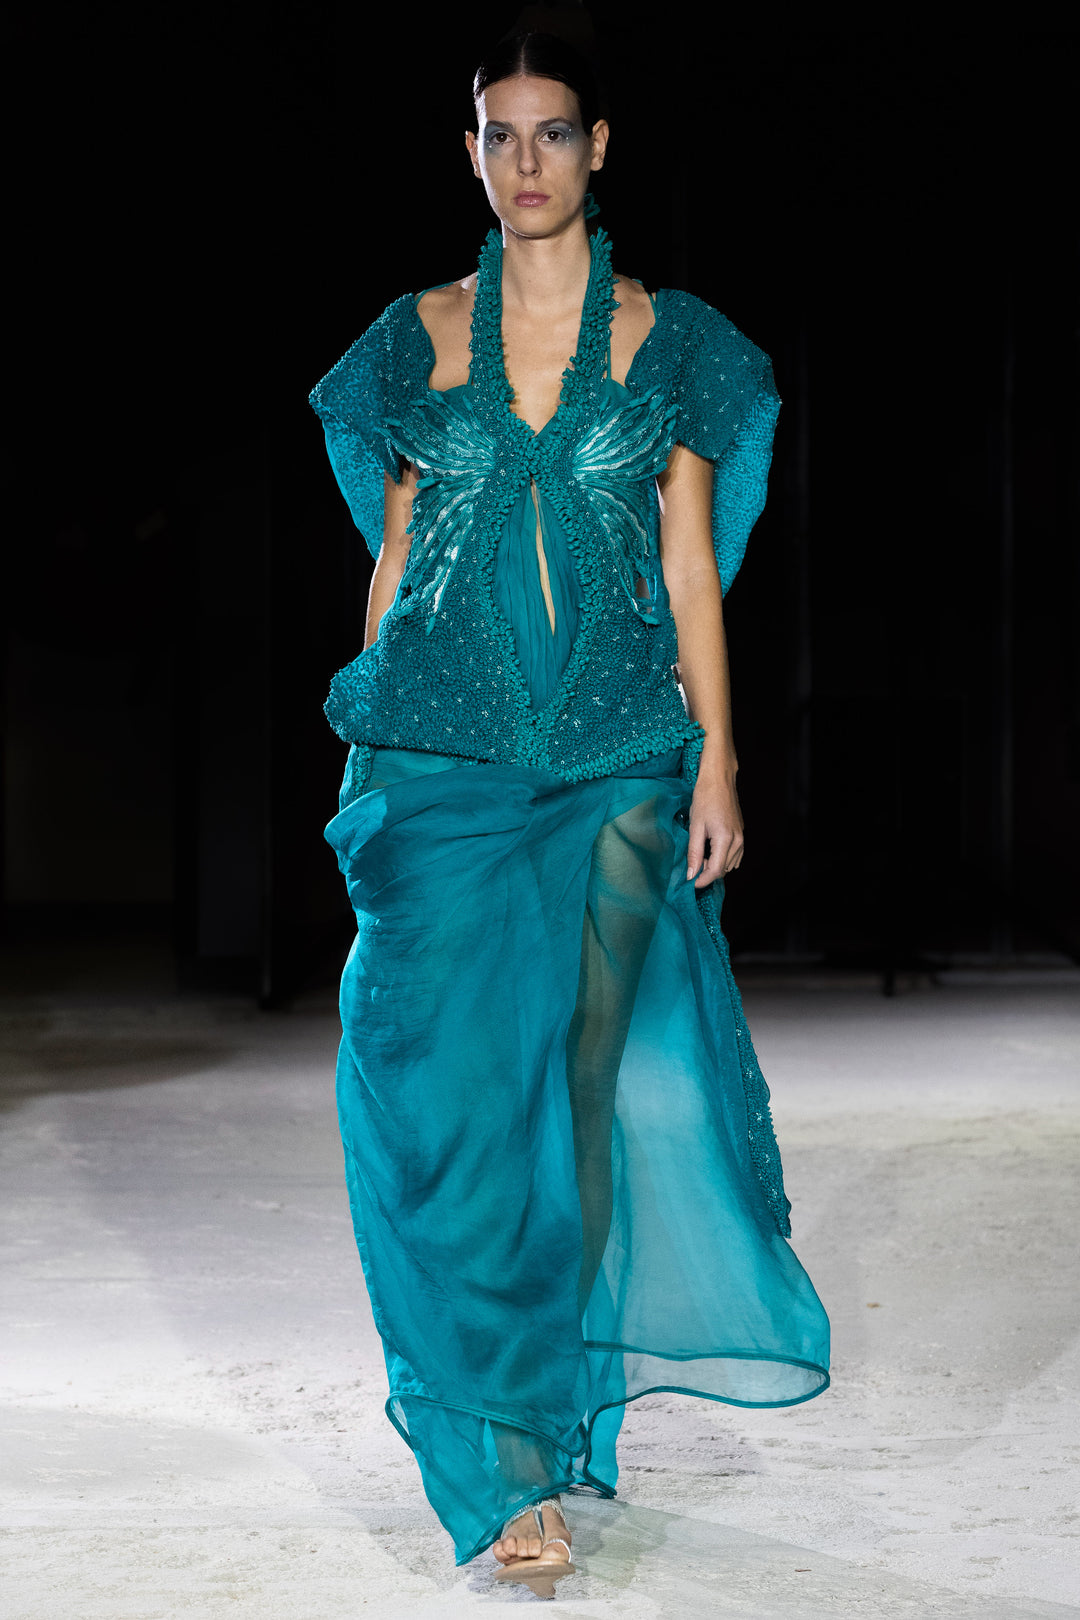 Abyss Halter Neck Turquoise Gown